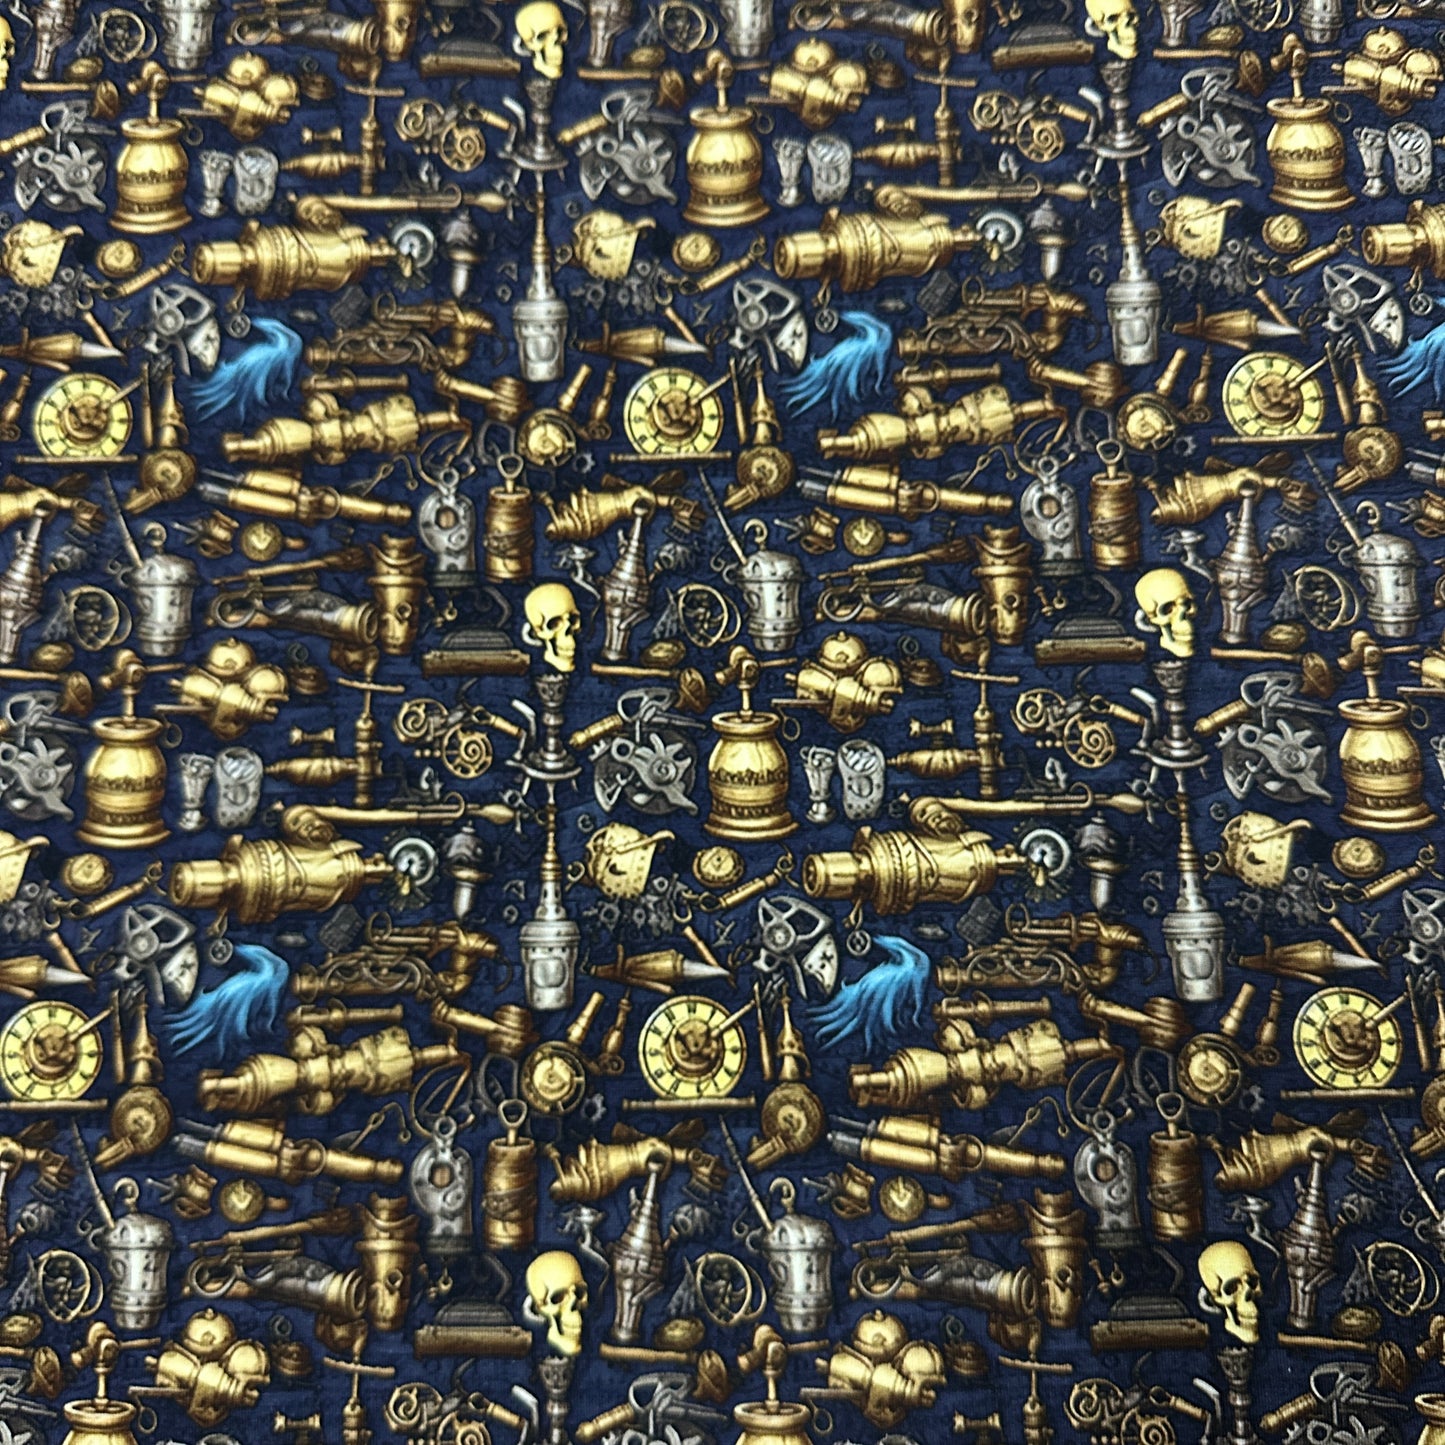 Pirate Weapons on Organic Cotton/Spandex Jersey Fabric